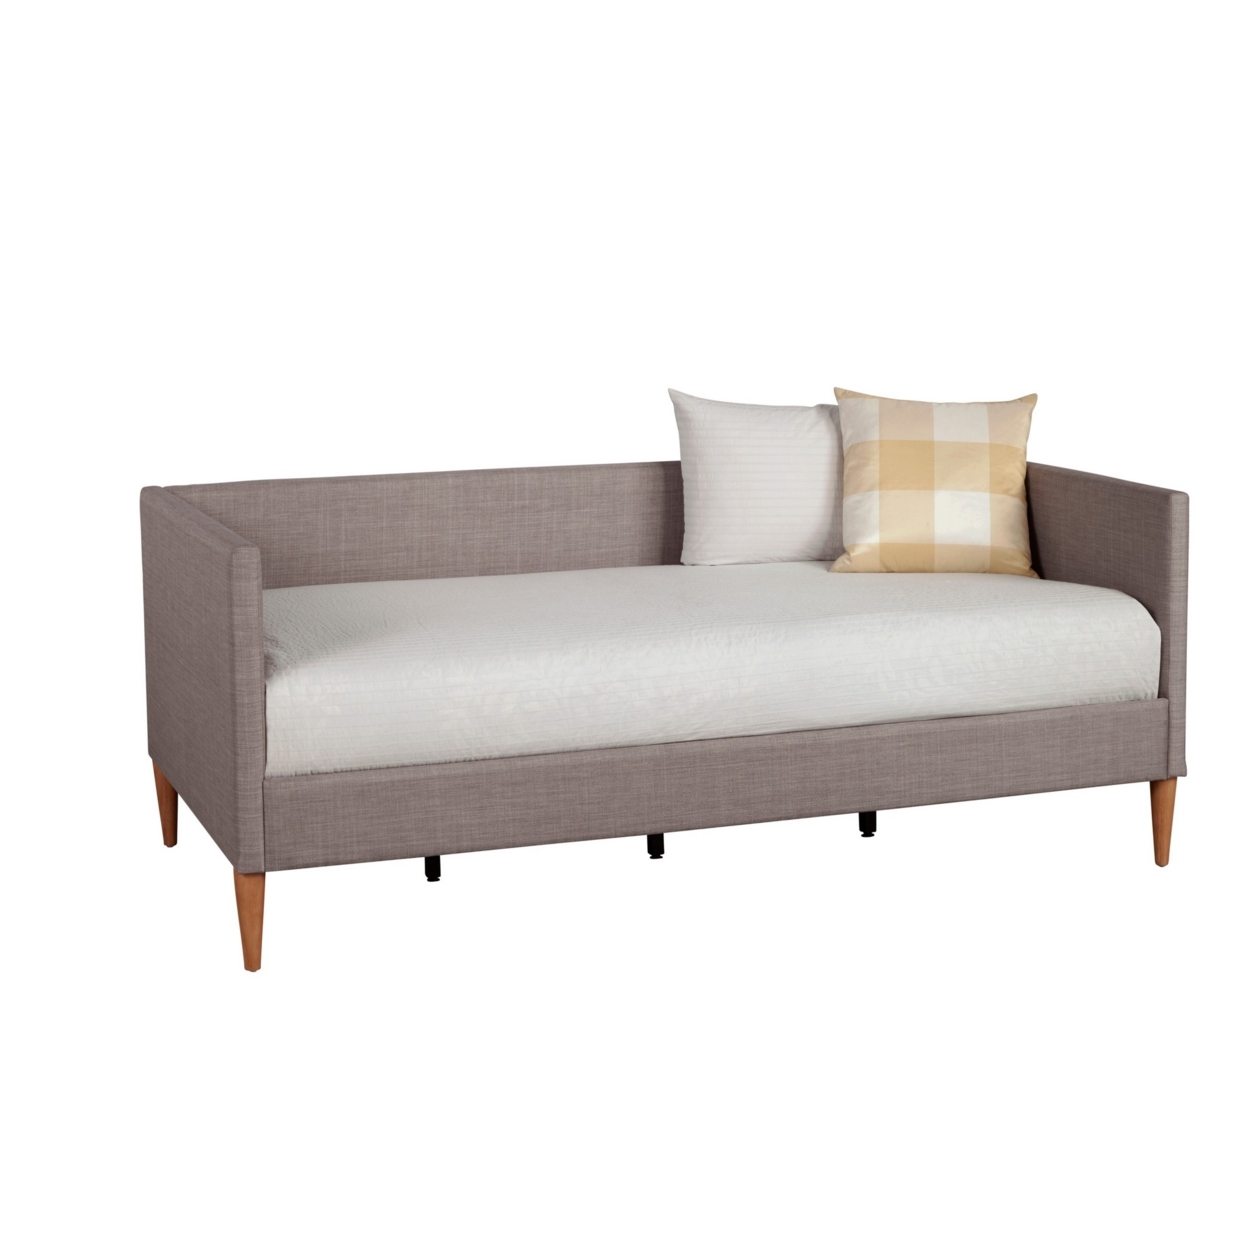 Daybed With Wooden Frame And Fabric Upholstery, Dark Gray- Saltoro Sherpi